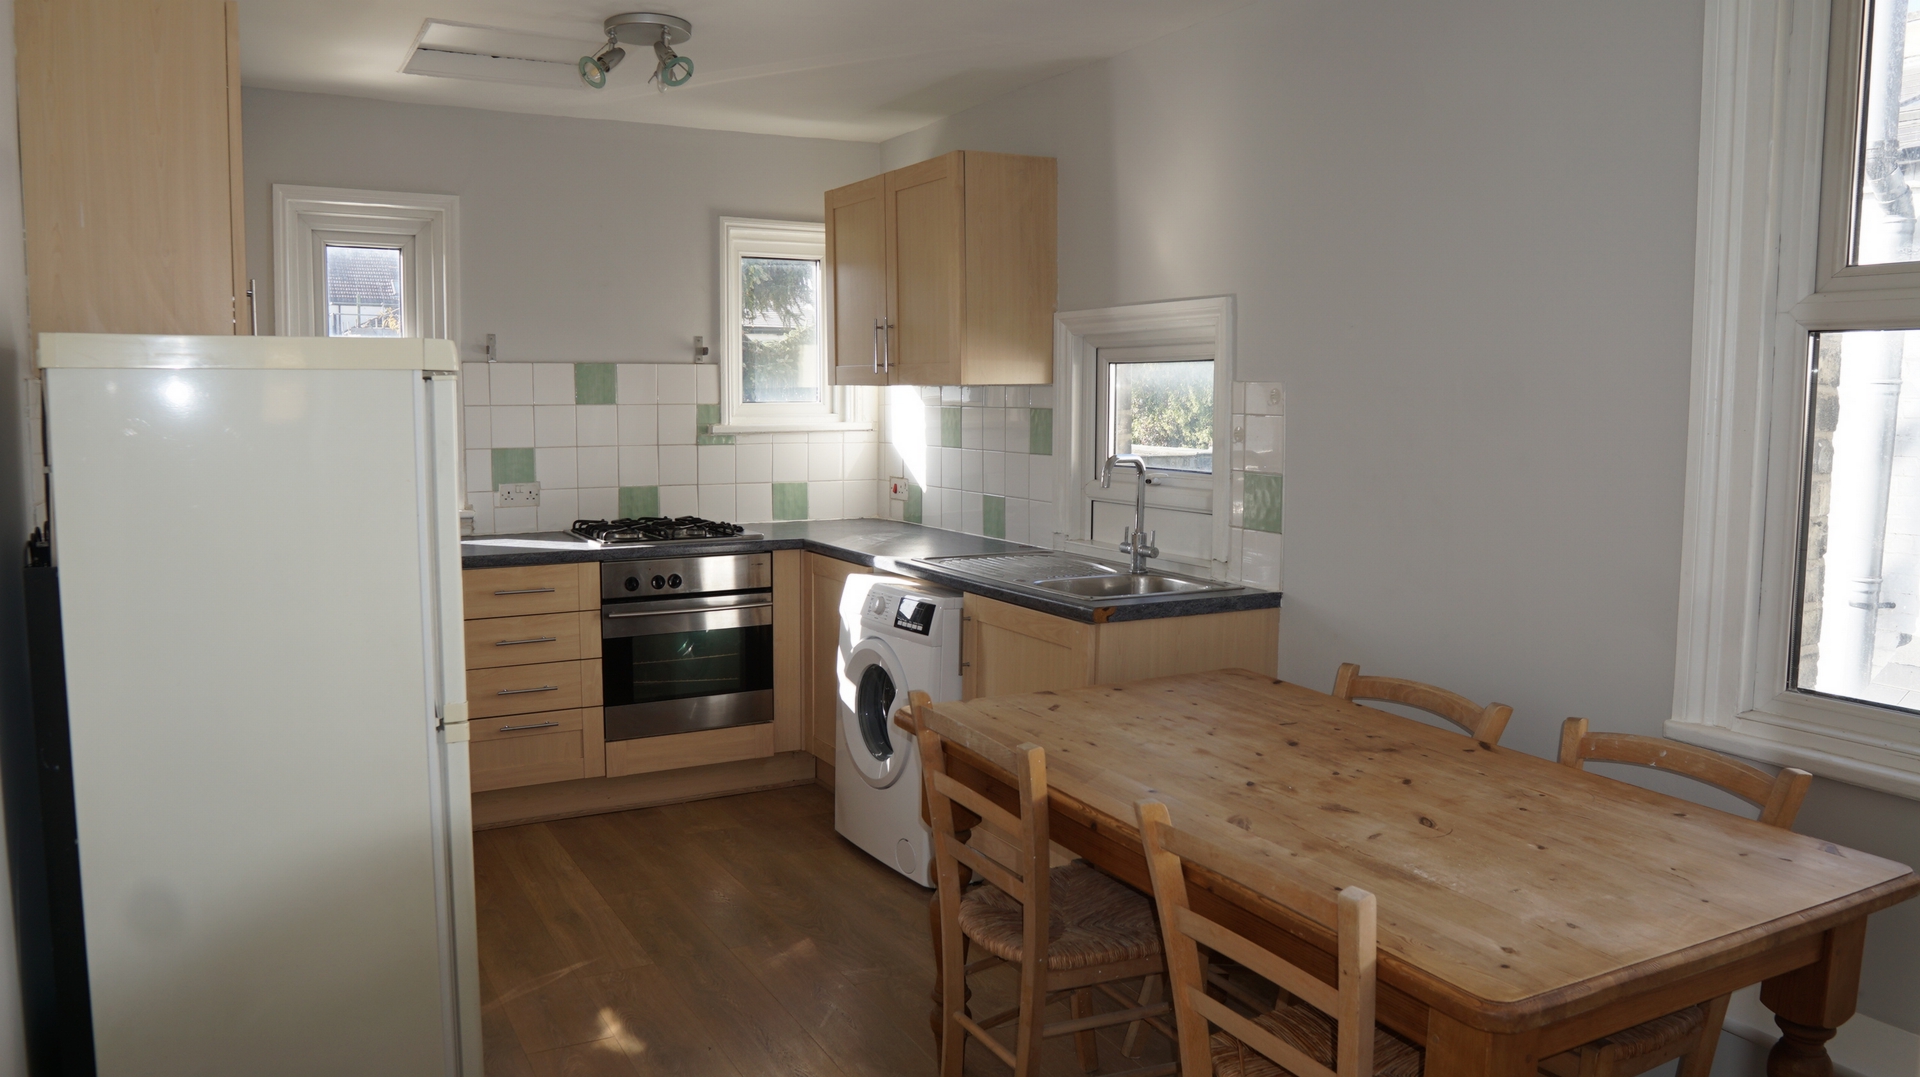 2 Bedroom Conversion to rent in Wimbledon, London, SW19